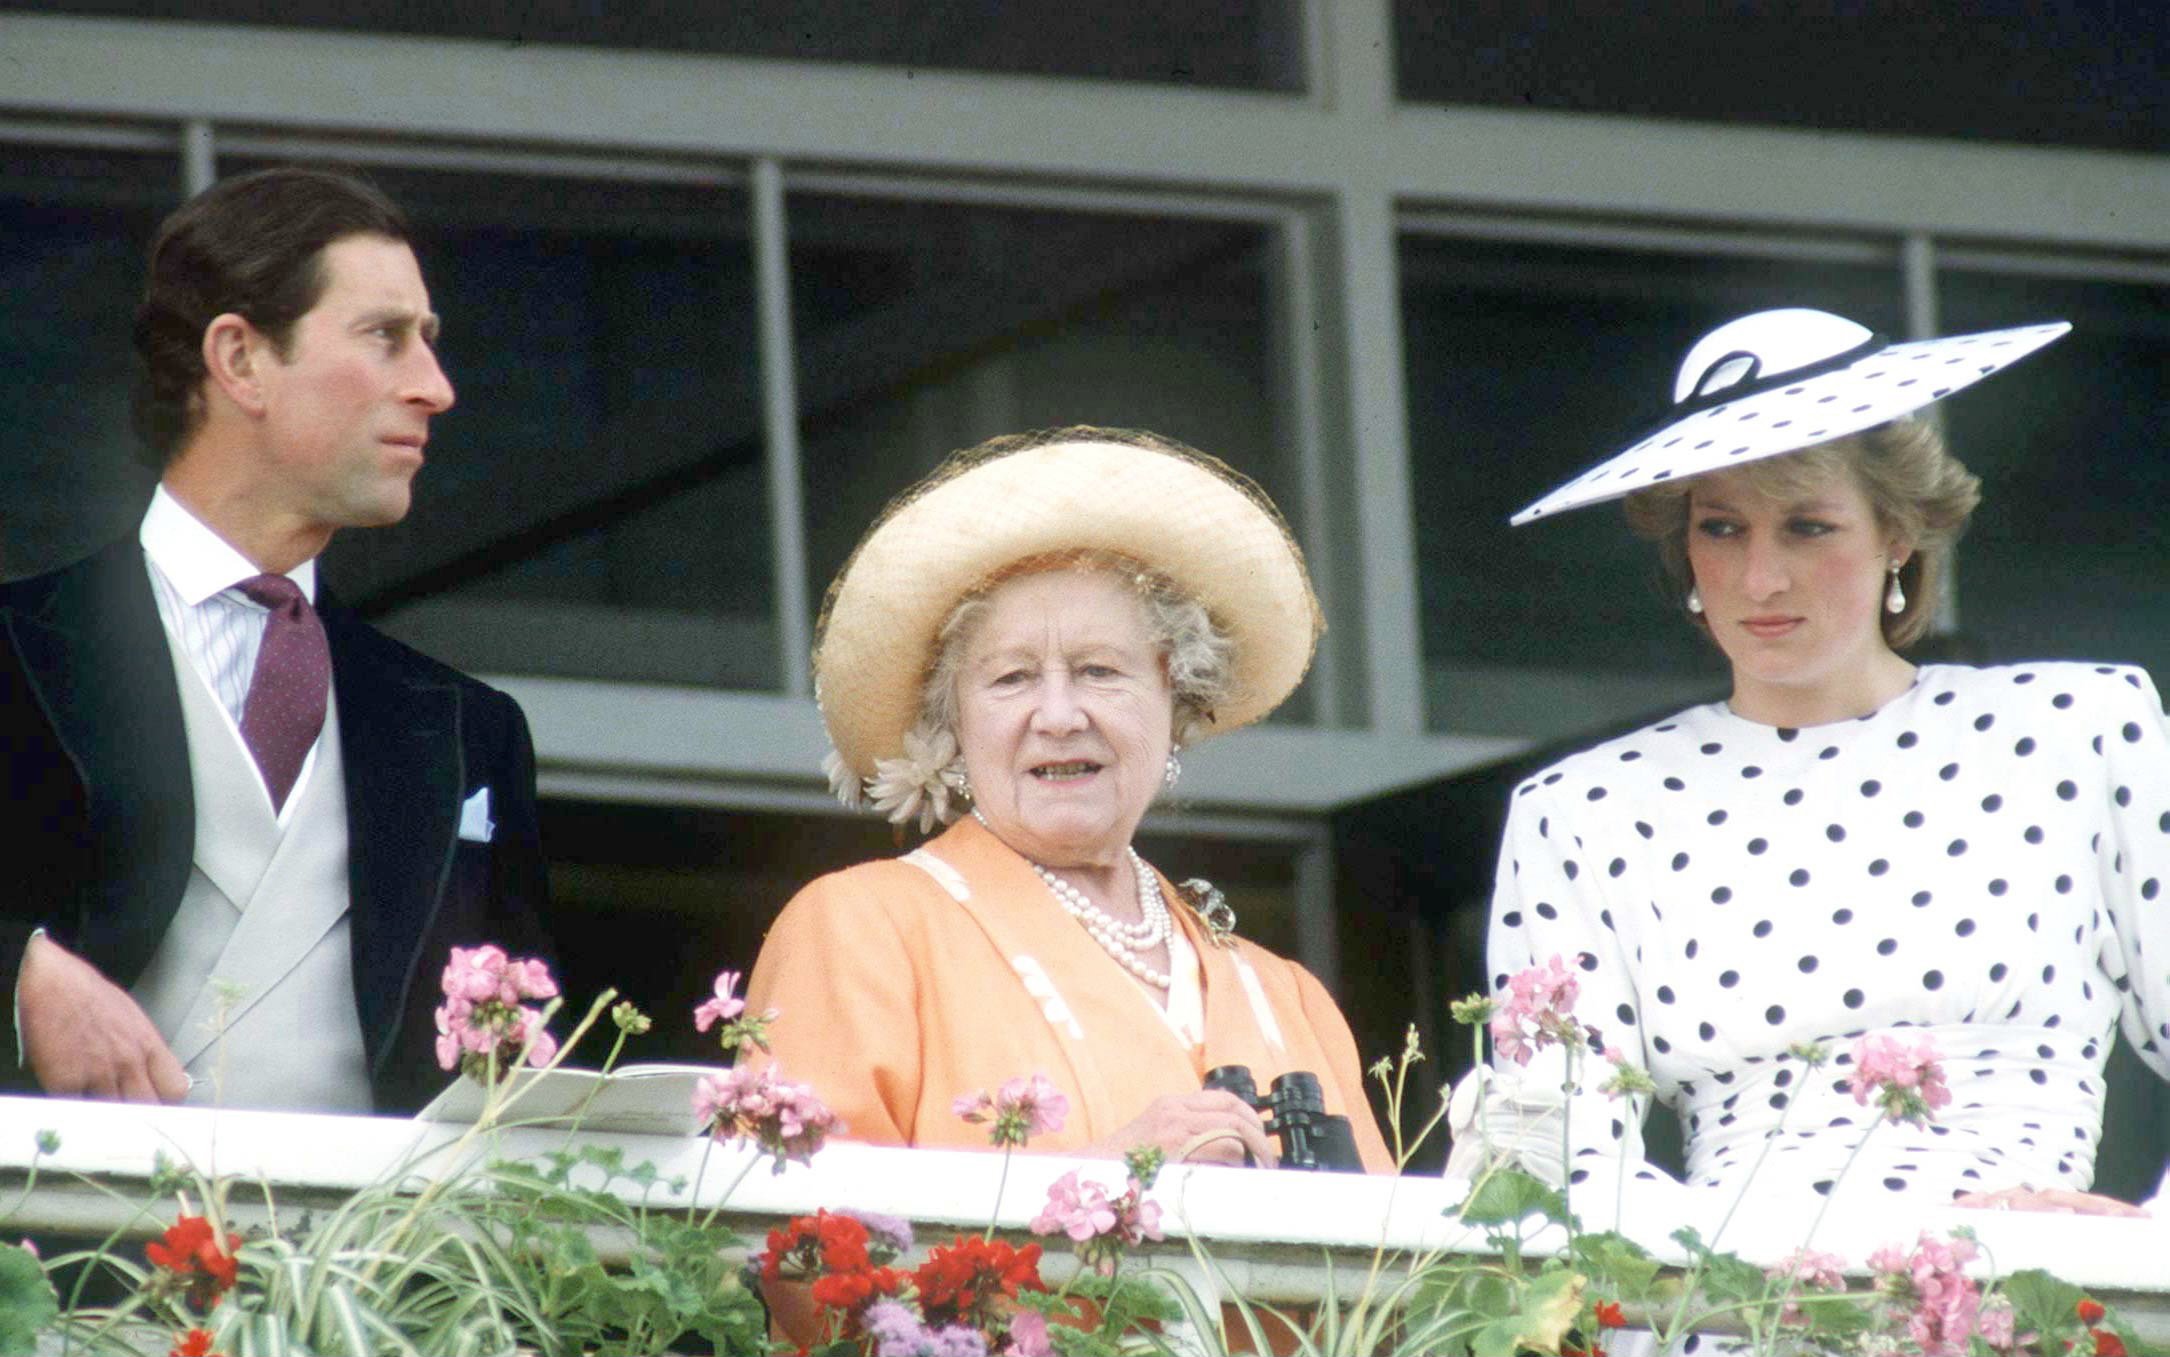 The Queen Mother Lied to Princess Diana About Prince Charles and Camilla’s Affair